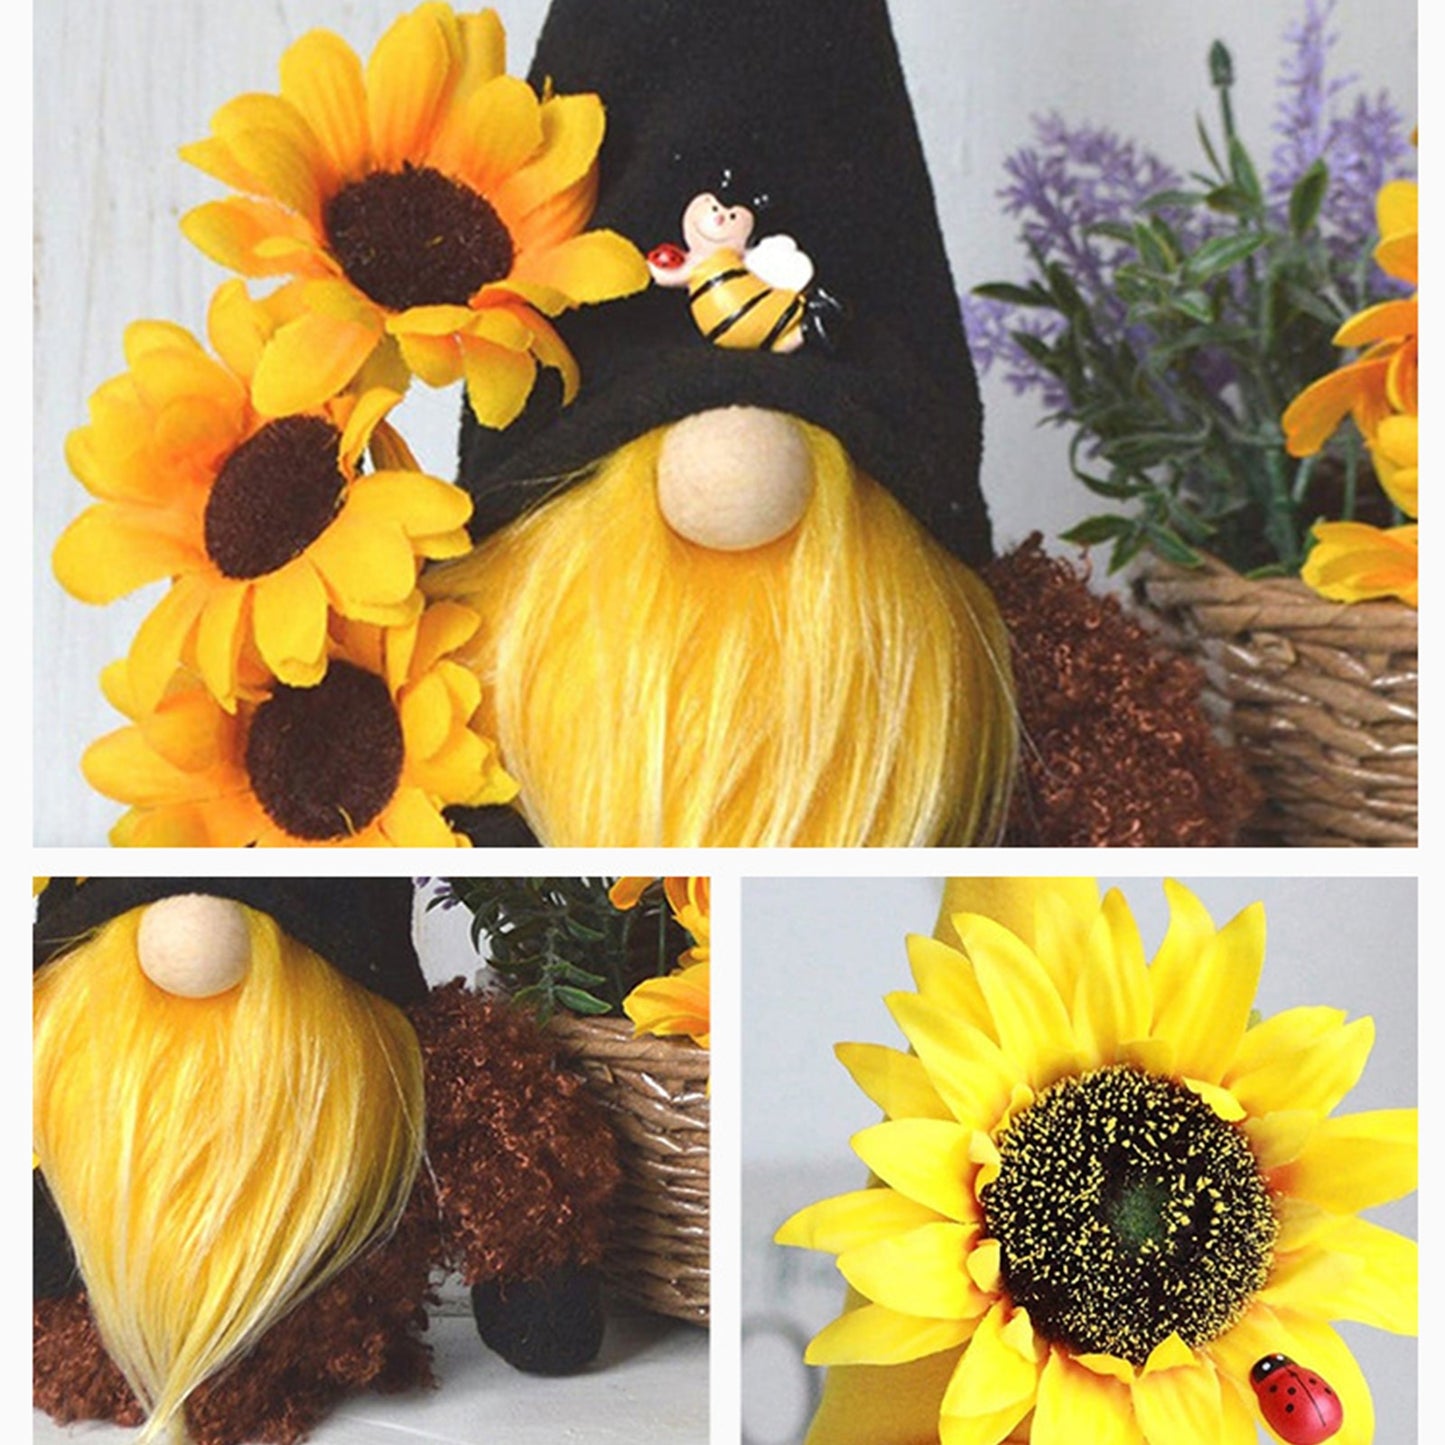 Sunflowers Faceless  Decor Ornaments Bee  Desktop Decoration Ornaments for Home Festivel Party Gifts